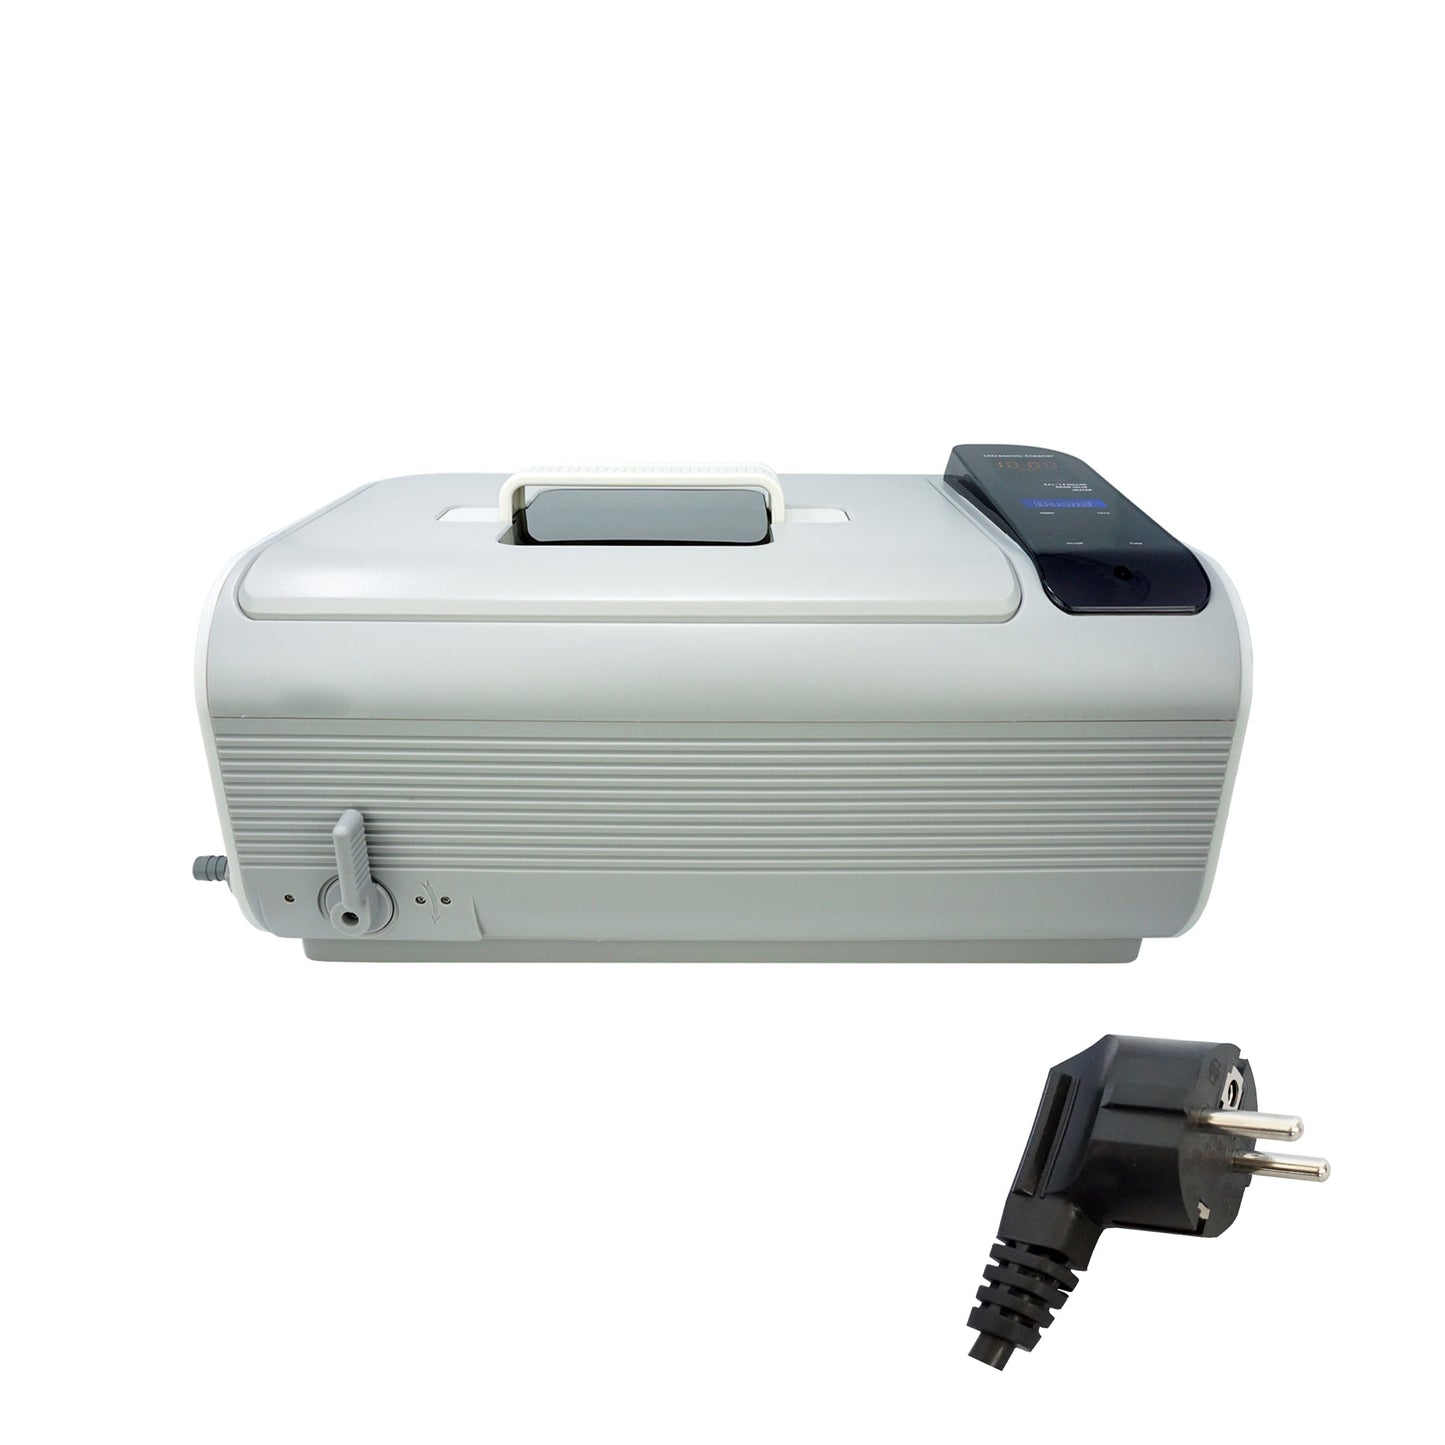 P4861-NH | iSonic® Ultrasonic Cleaner, 6L/1.6Gal, 110V, 30-minute timer, no heaters, with stainless steel basket (for Dental, Vet and Medical Instruments)